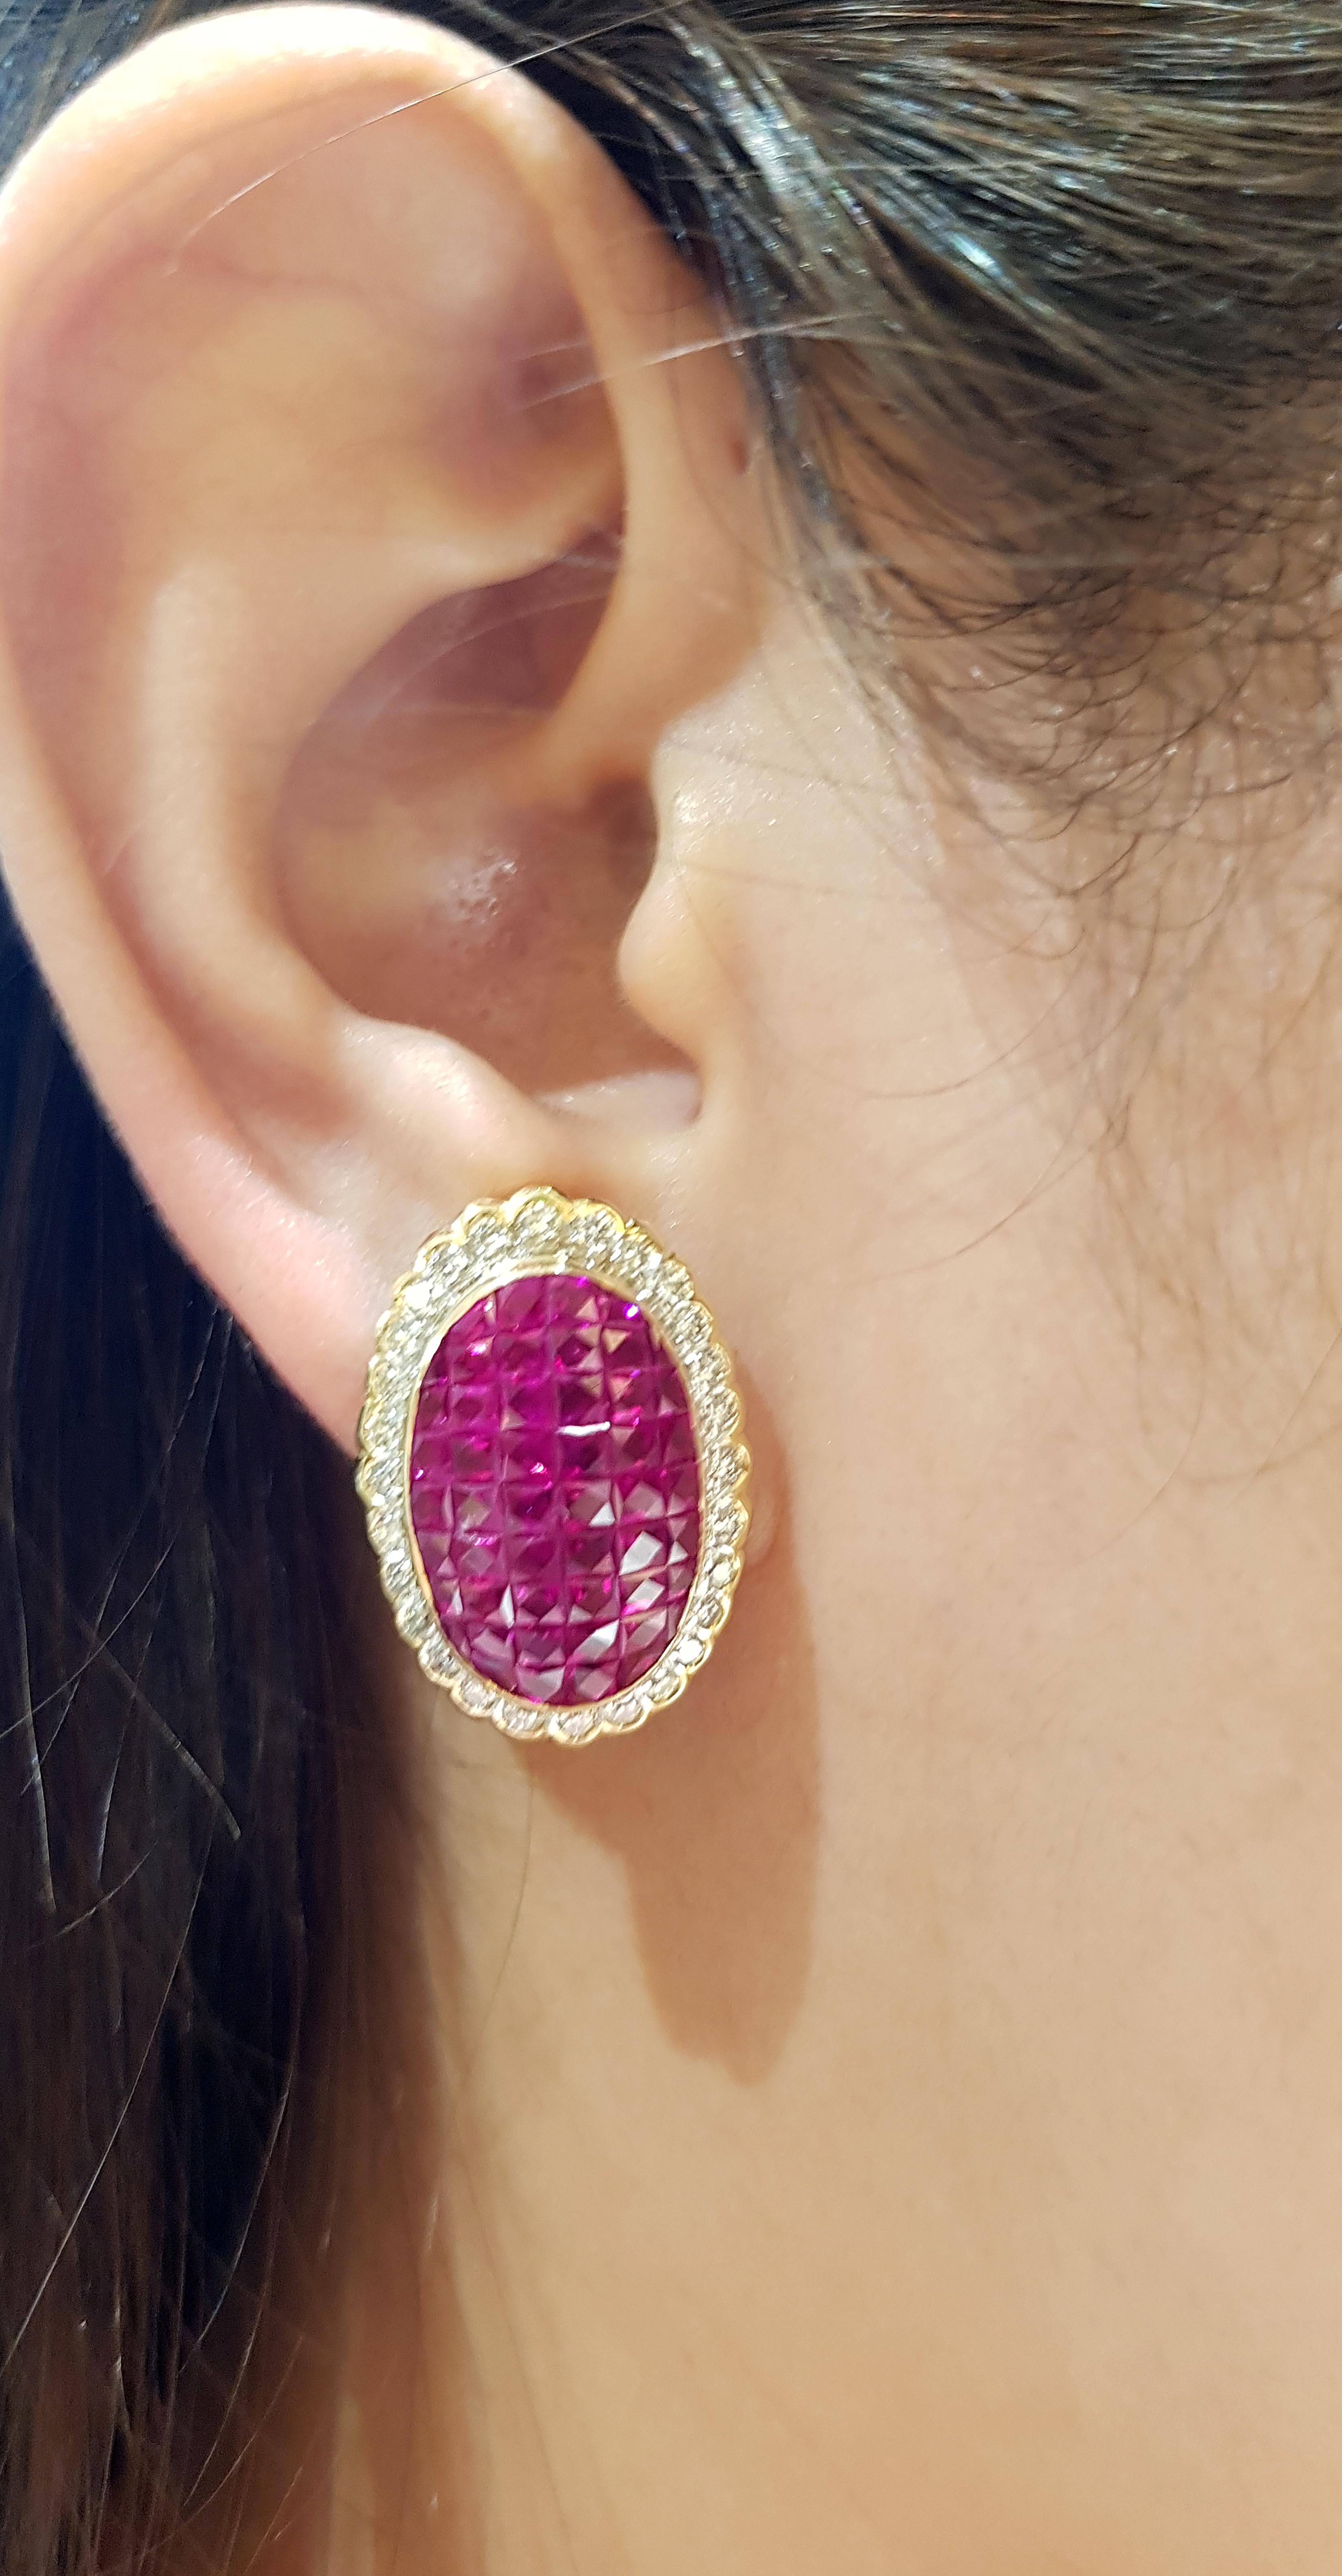 Ruby 7.85 carats with Diamond 0.99 carat Earrings set in 18 Karat Gold Settings

Width:  1.7 cm 
Length: 2.4 cm
Total Weight: 12.23 grams

